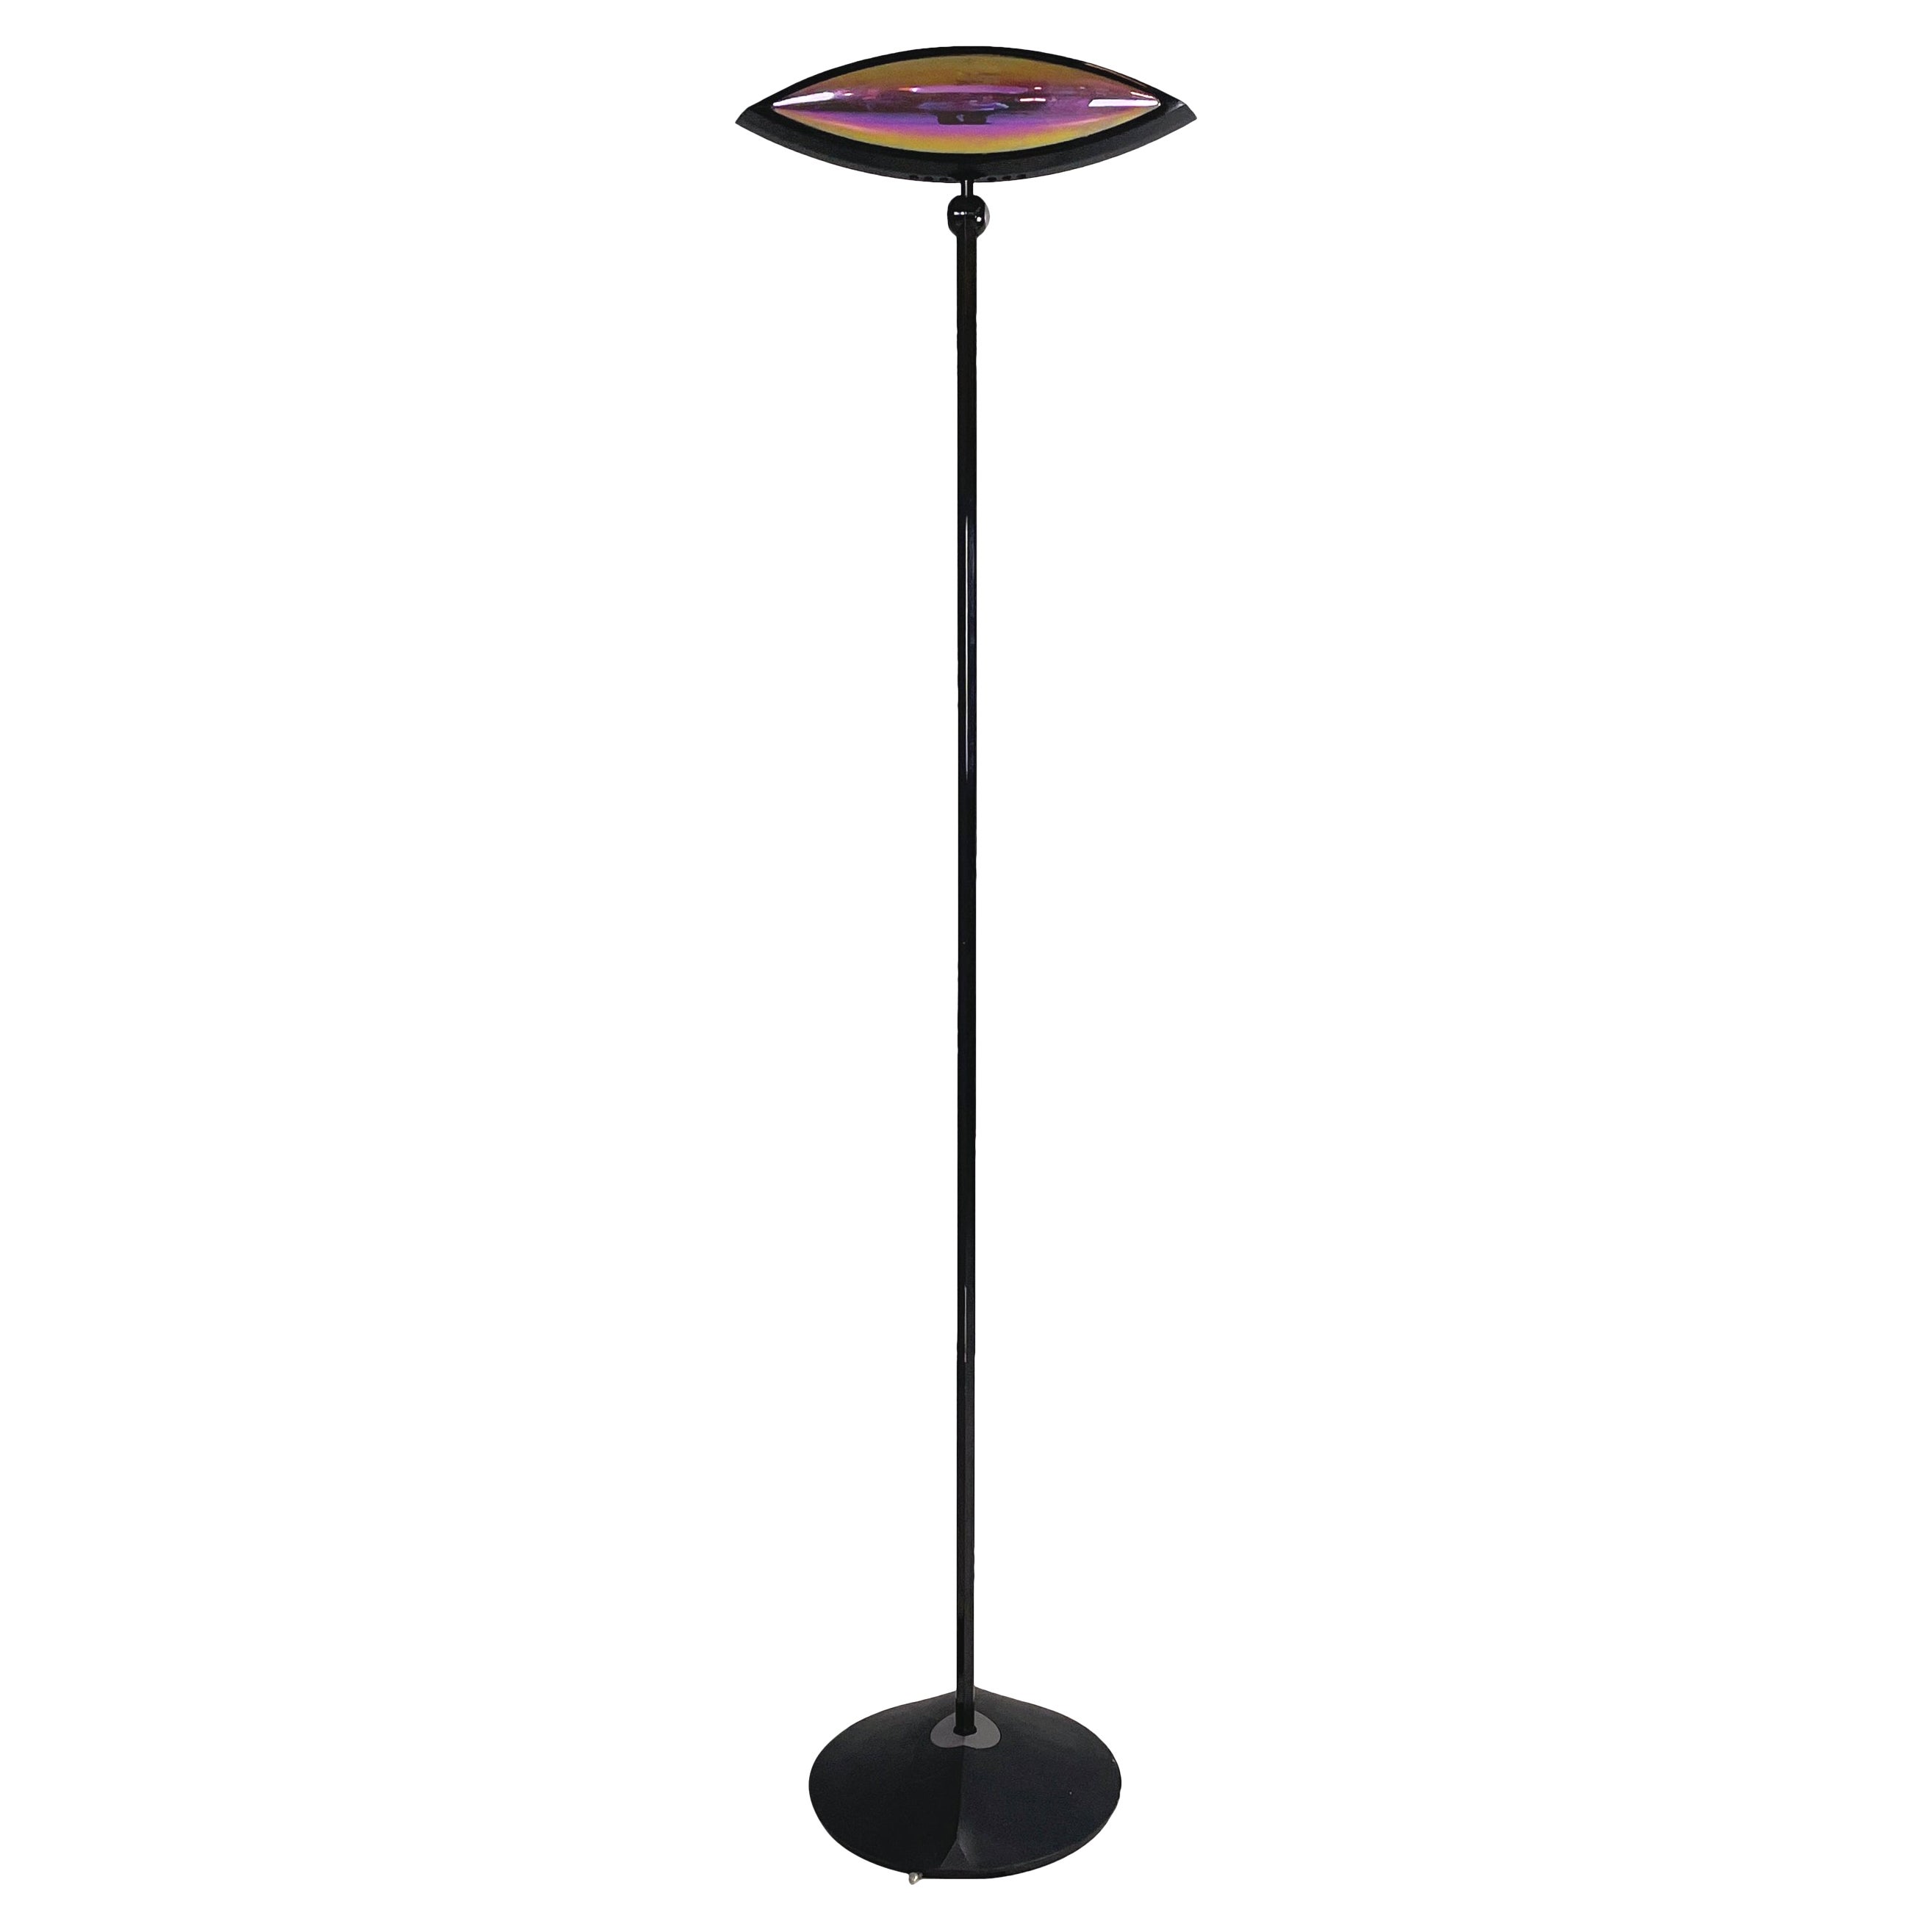 Italian modern color glass and metal Floor lamp Aeto by Lombardo for Flos, 1980s For Sale